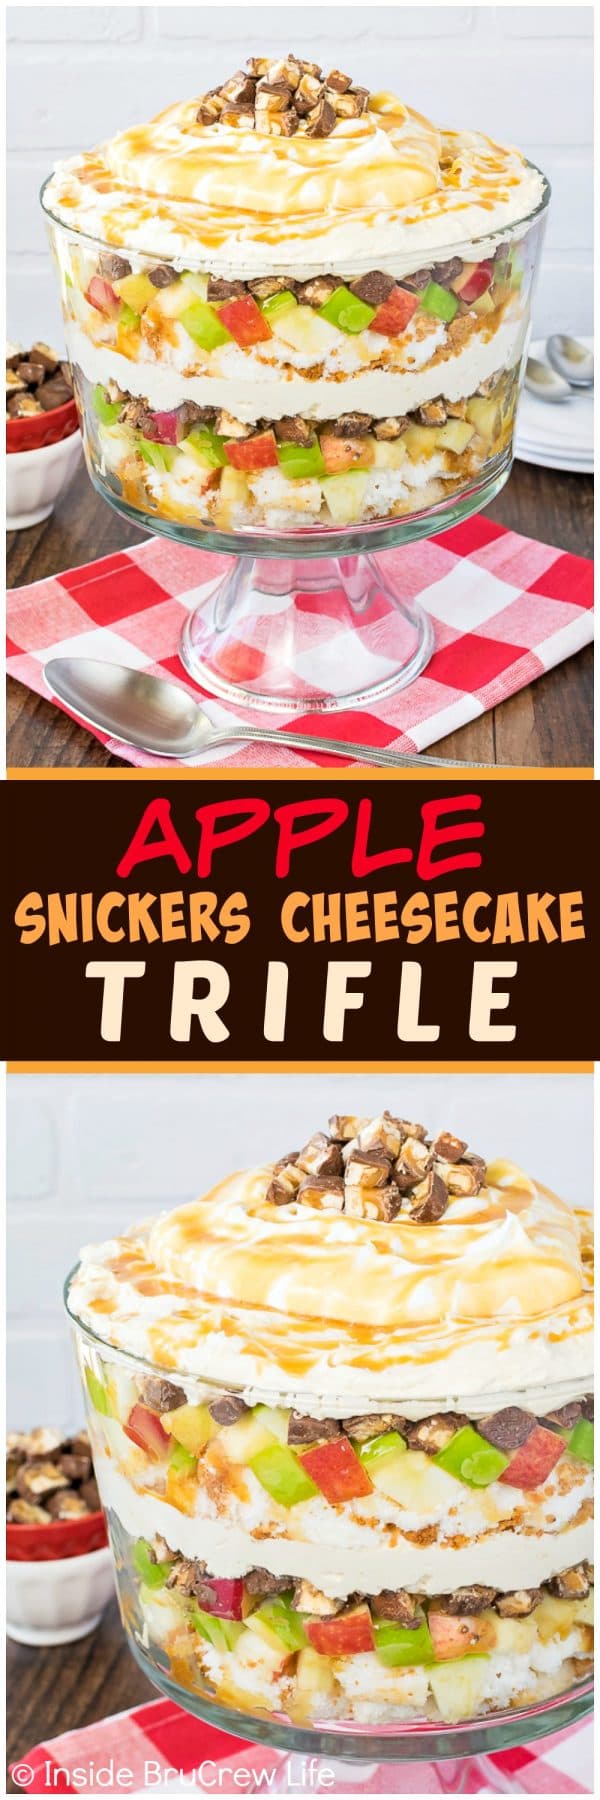 Apple Snickers Cheesecake Trifle - this no bake dessert has layers of apples, candy bars, cheesecake, and cake. Easy recipe for summer picnics!